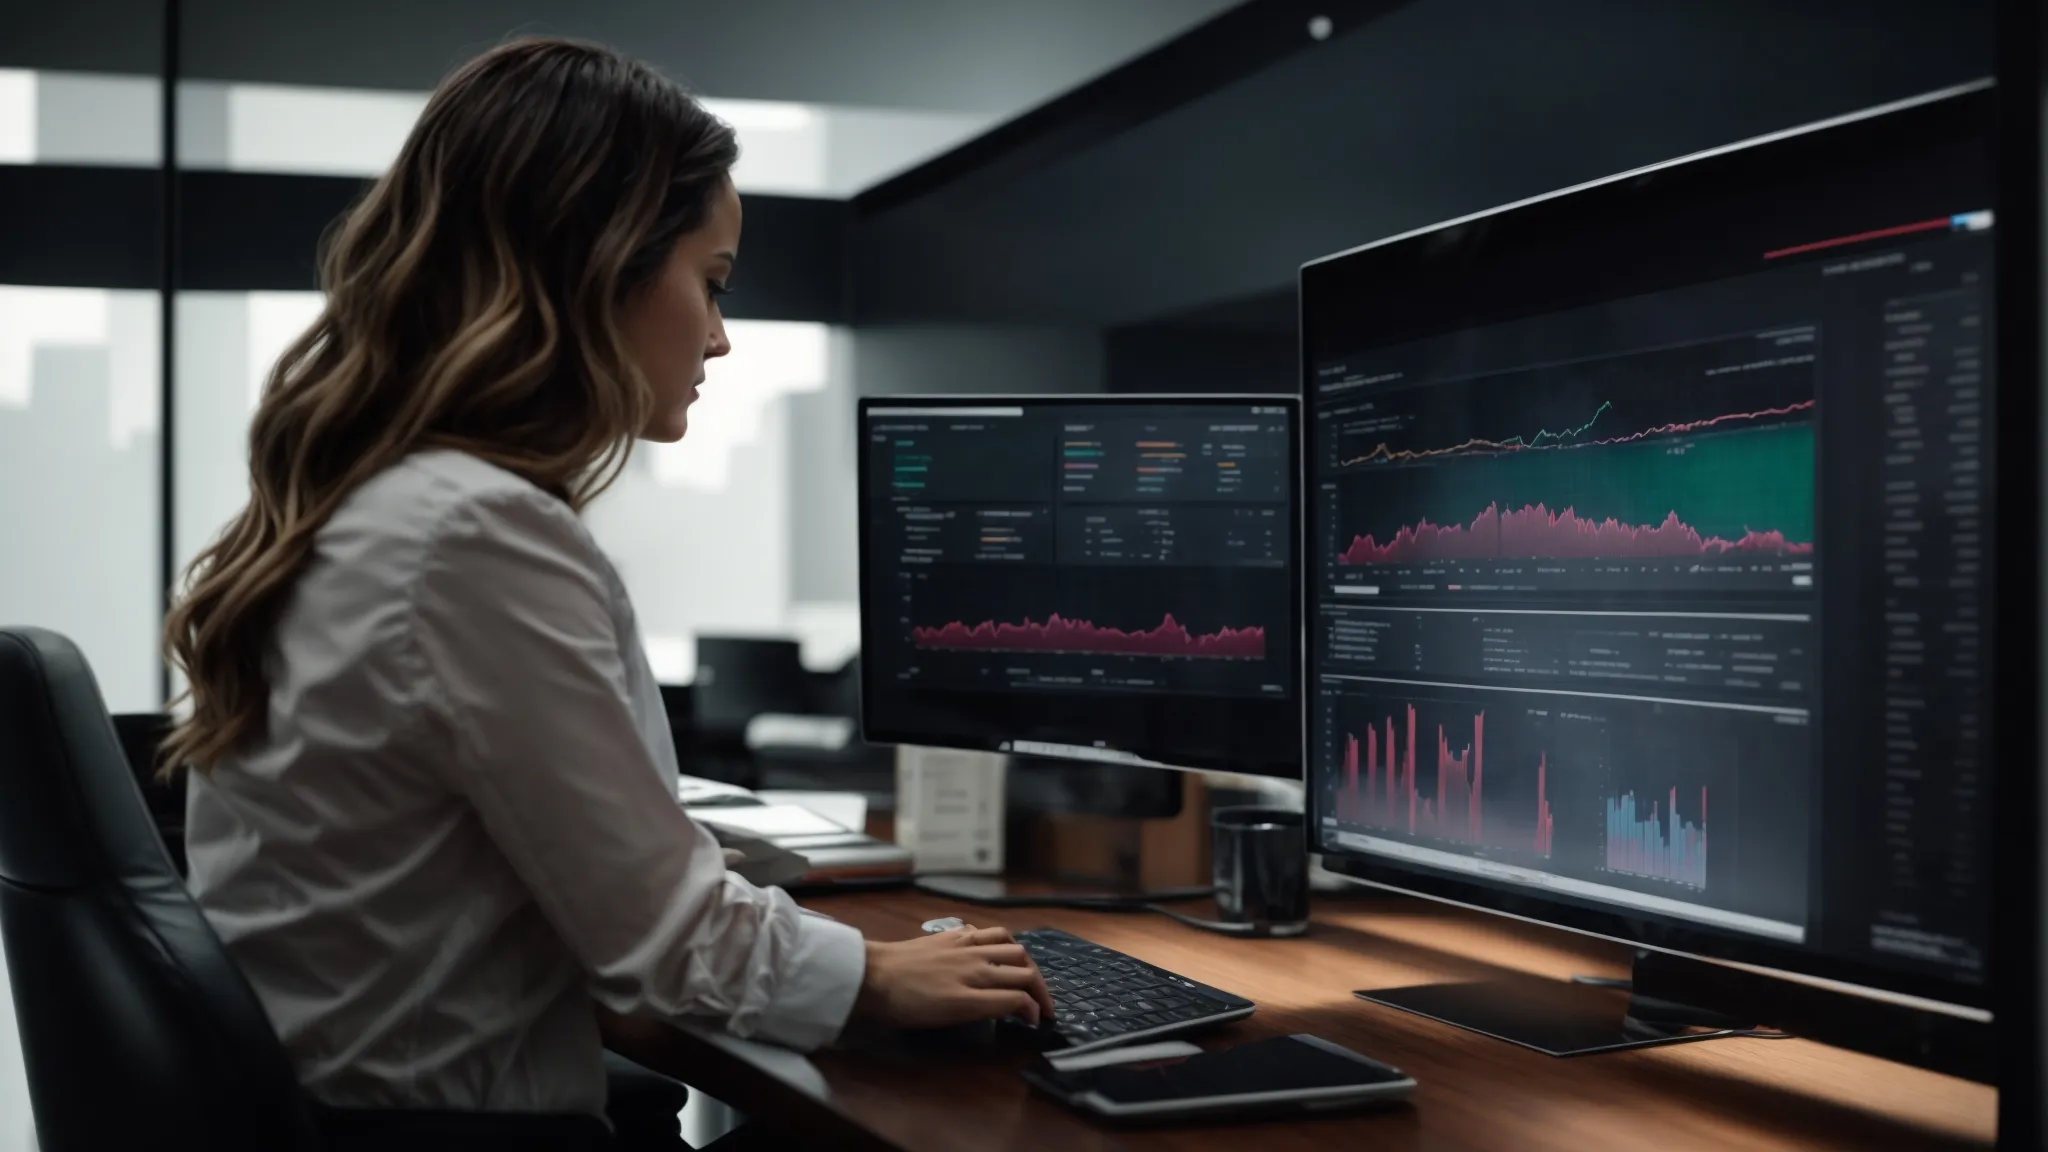 a top executive reviews a visual analytics dashboard on a sleek, modern computer in a luxurious office.